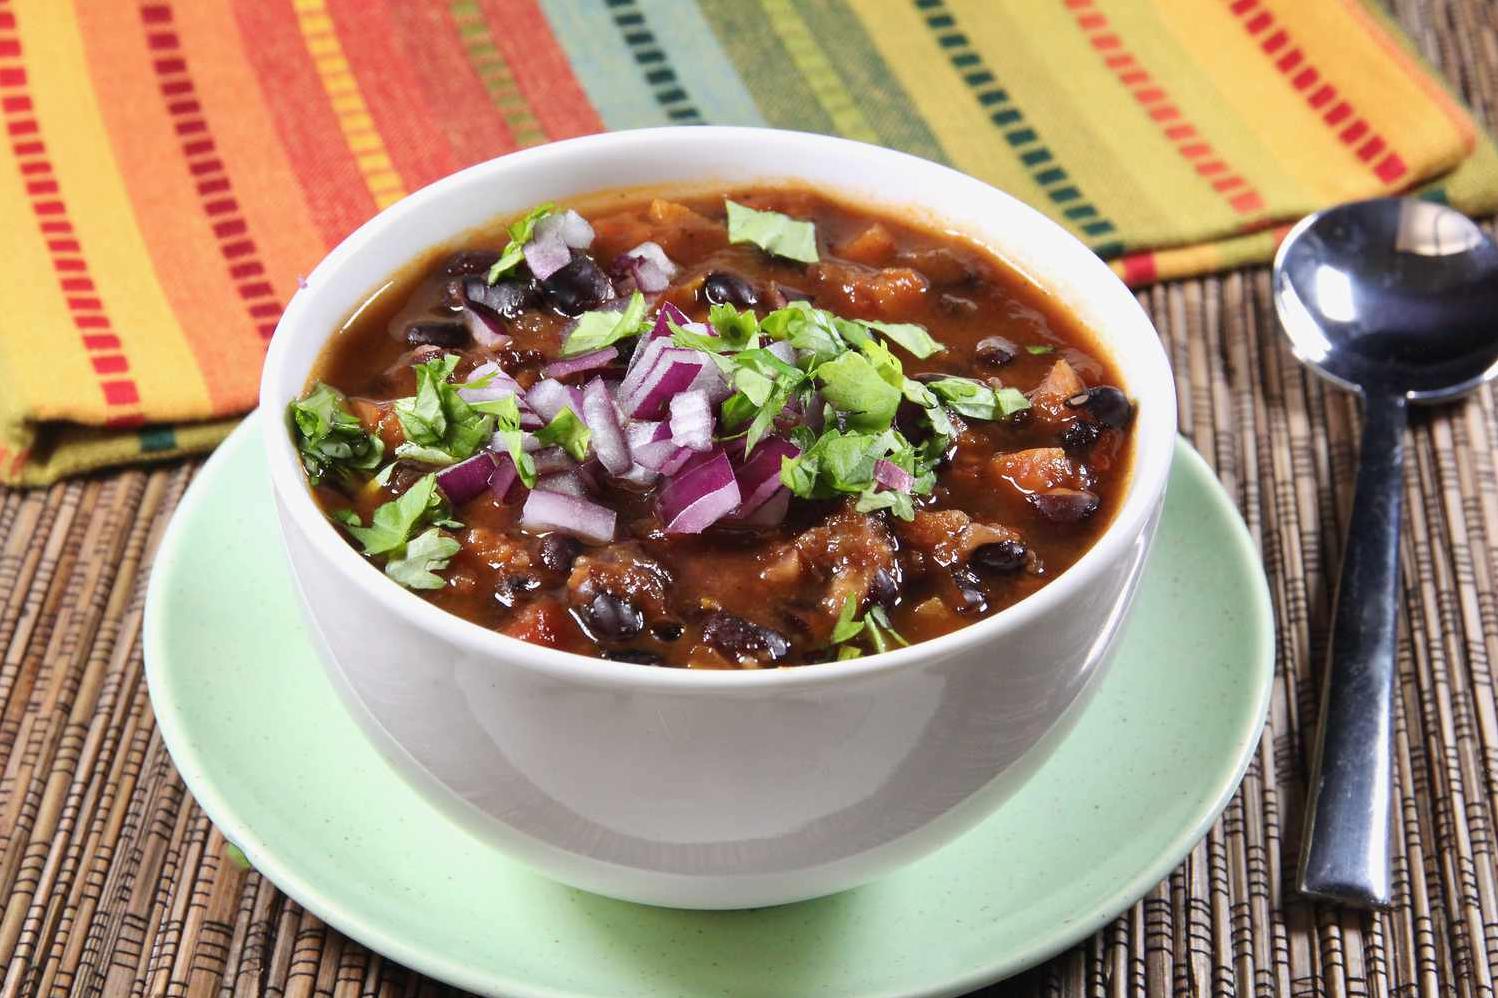  Top off your Instant Pot Cuban Black Bean Soup with a dollop of sour cream for added creaminess.